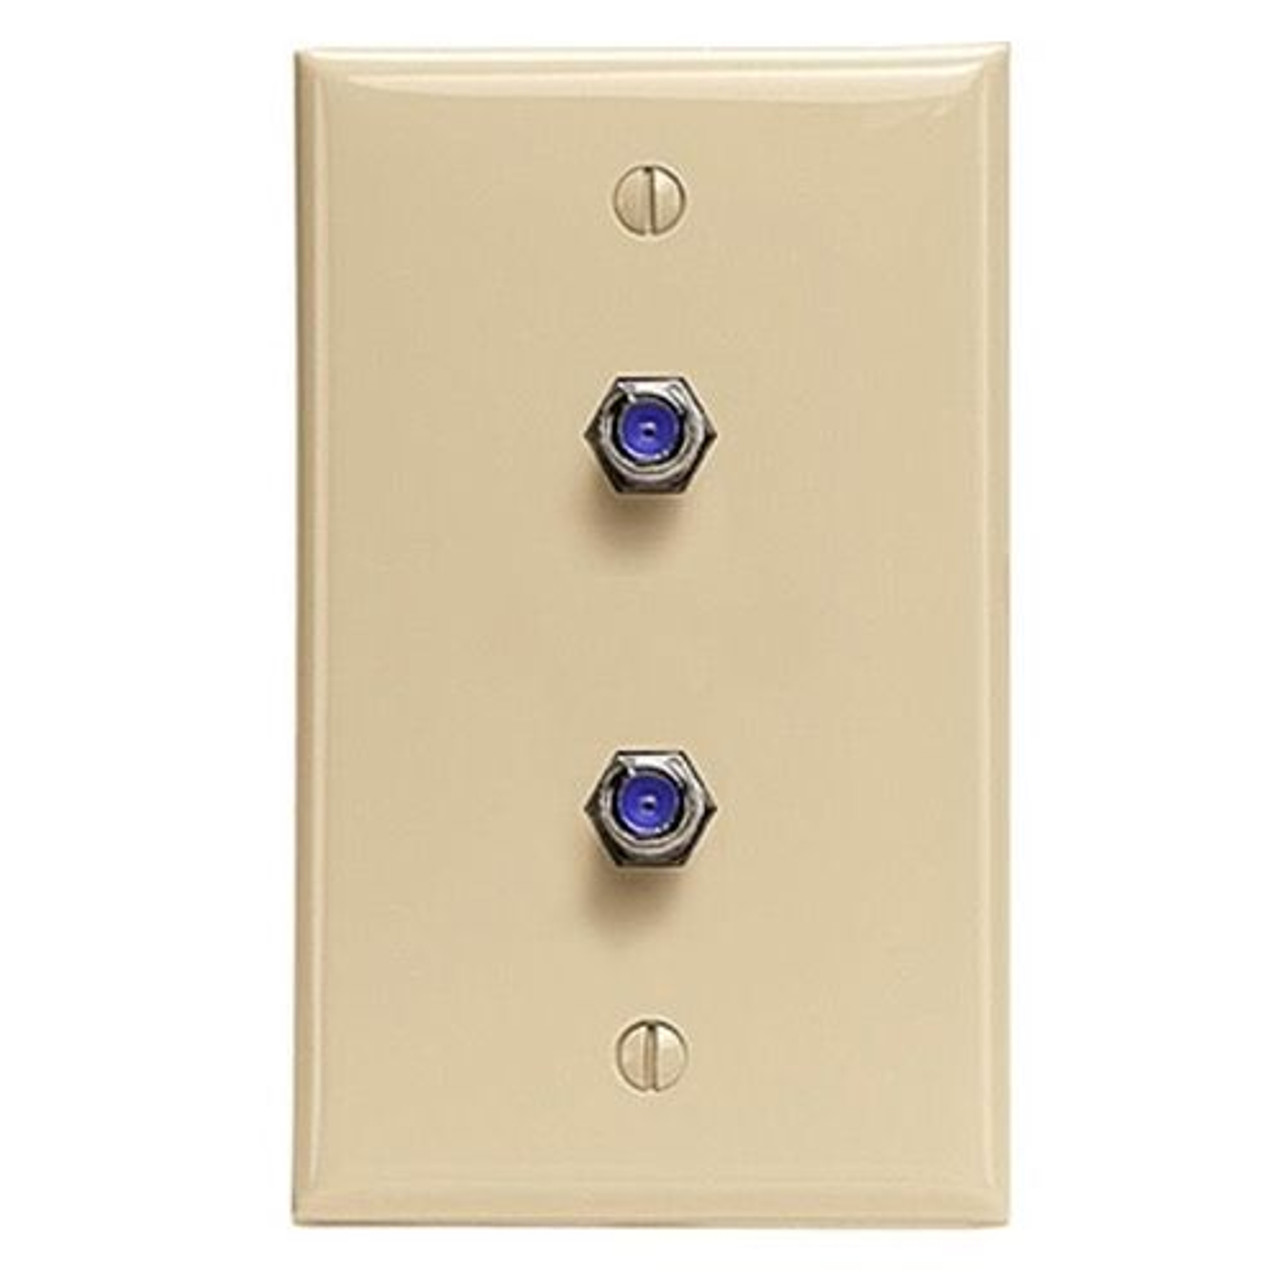 Eagle Dual F Type Wall Plate Ivory 3 GHz F-81 Coaxial Cable Video Connection Eagle Aspen Duplex TV Antenna Signal Flush Mount with 75 Ohm Barrel Plug Jacks